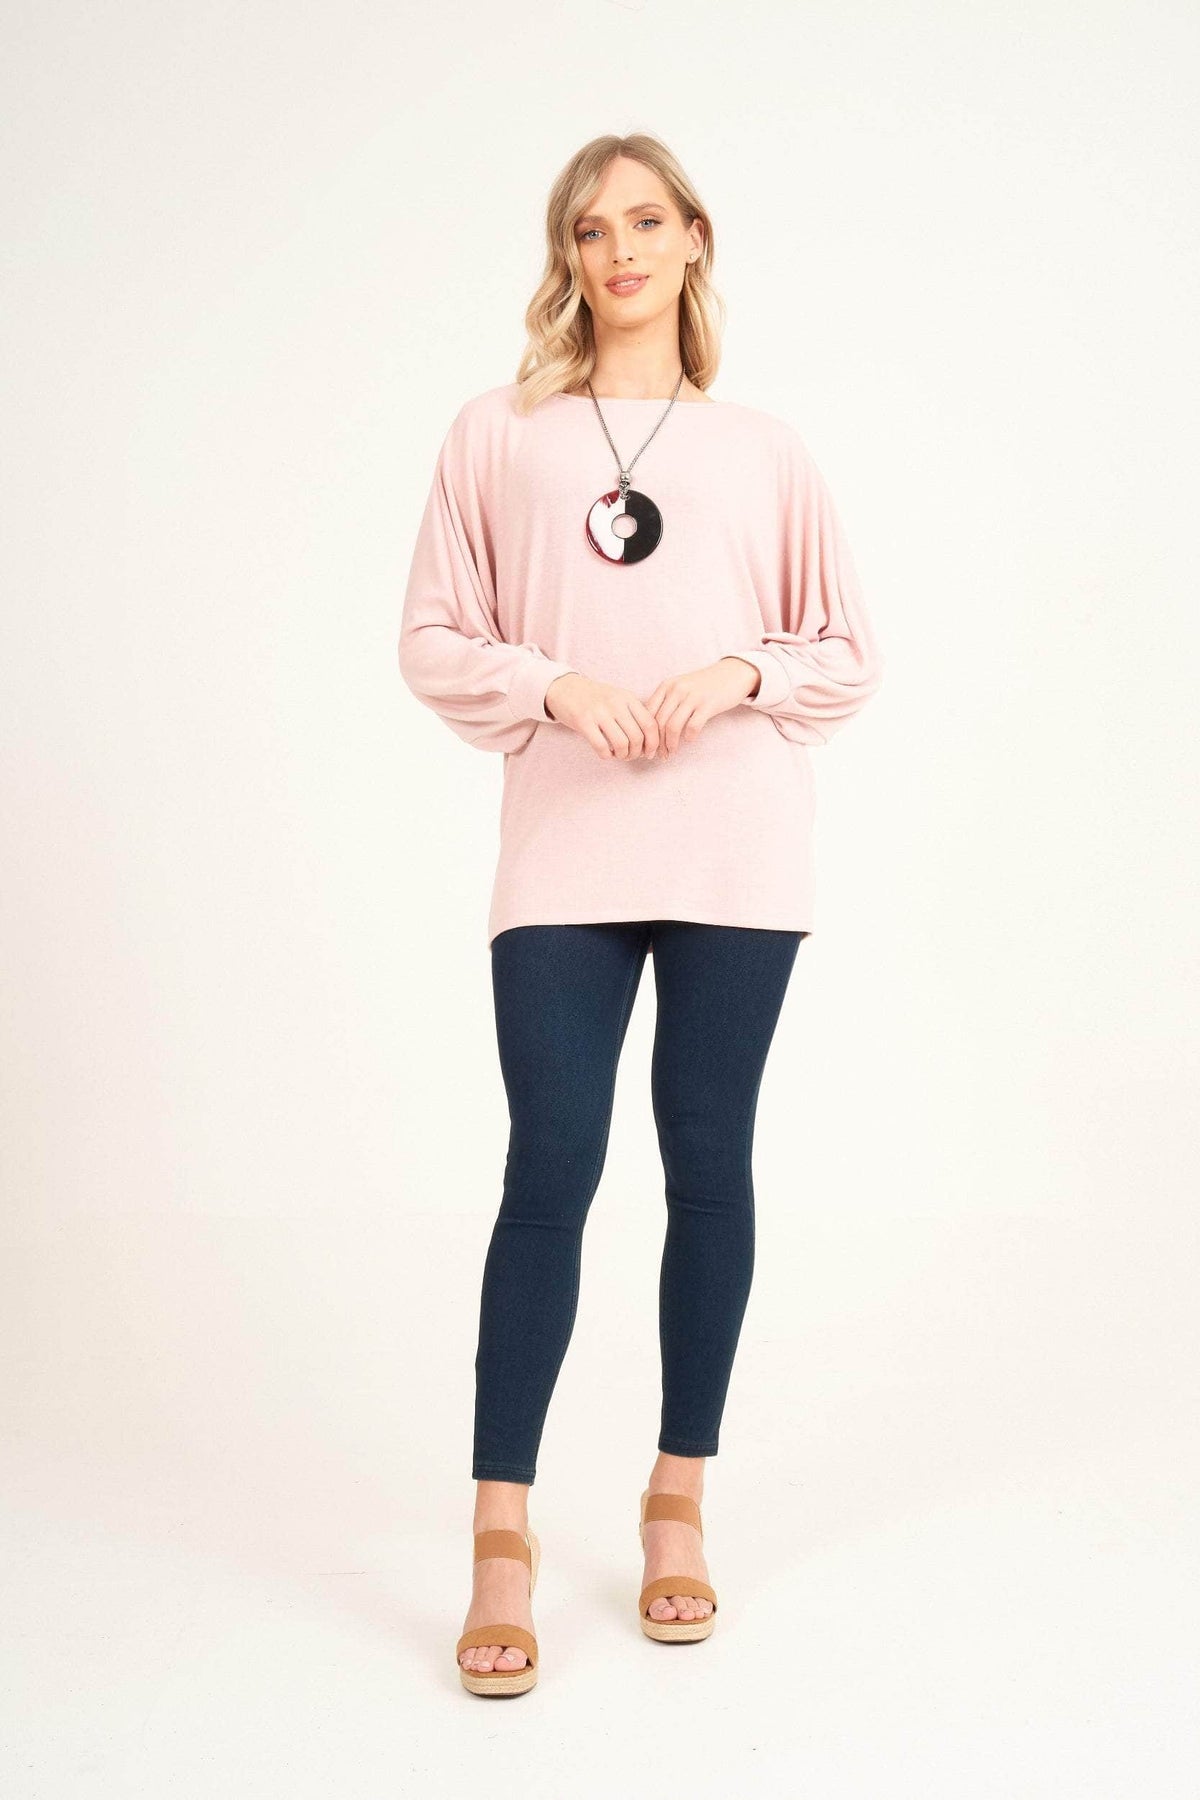 Saloos Top 'Rhea' Knit-Feel Loungewear Top with Necklace